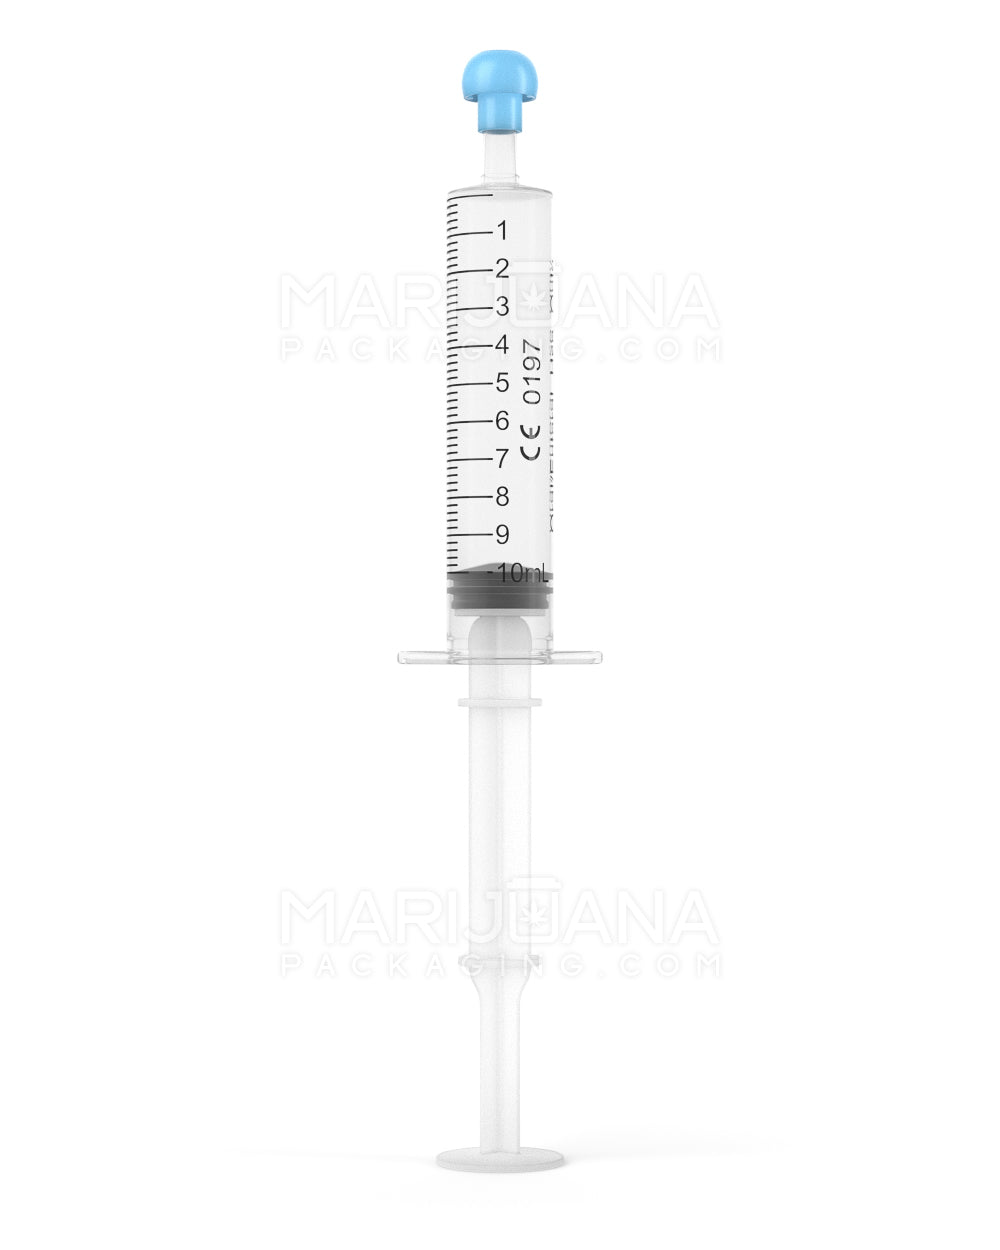 Plastic Oral Concentrate Syringes | 10mL - 1mL Increments - 100 Count - 1